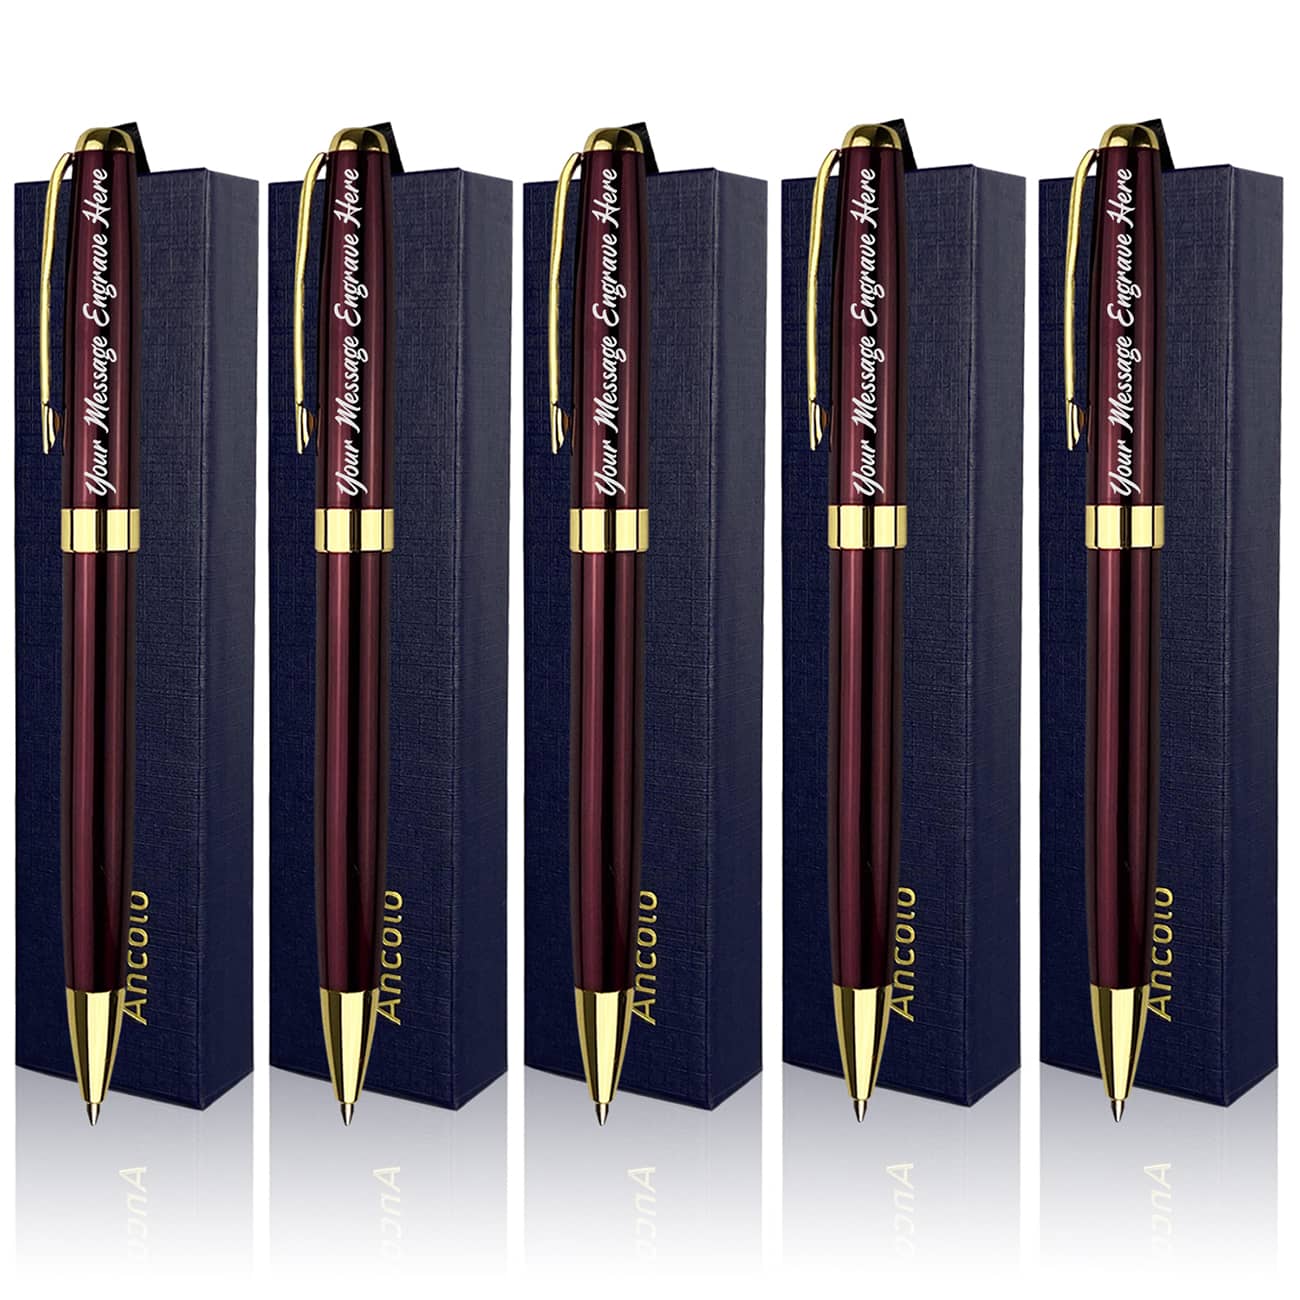 Northland Personalized Gift Sheaffer Roller-Ball Pen - Northland India